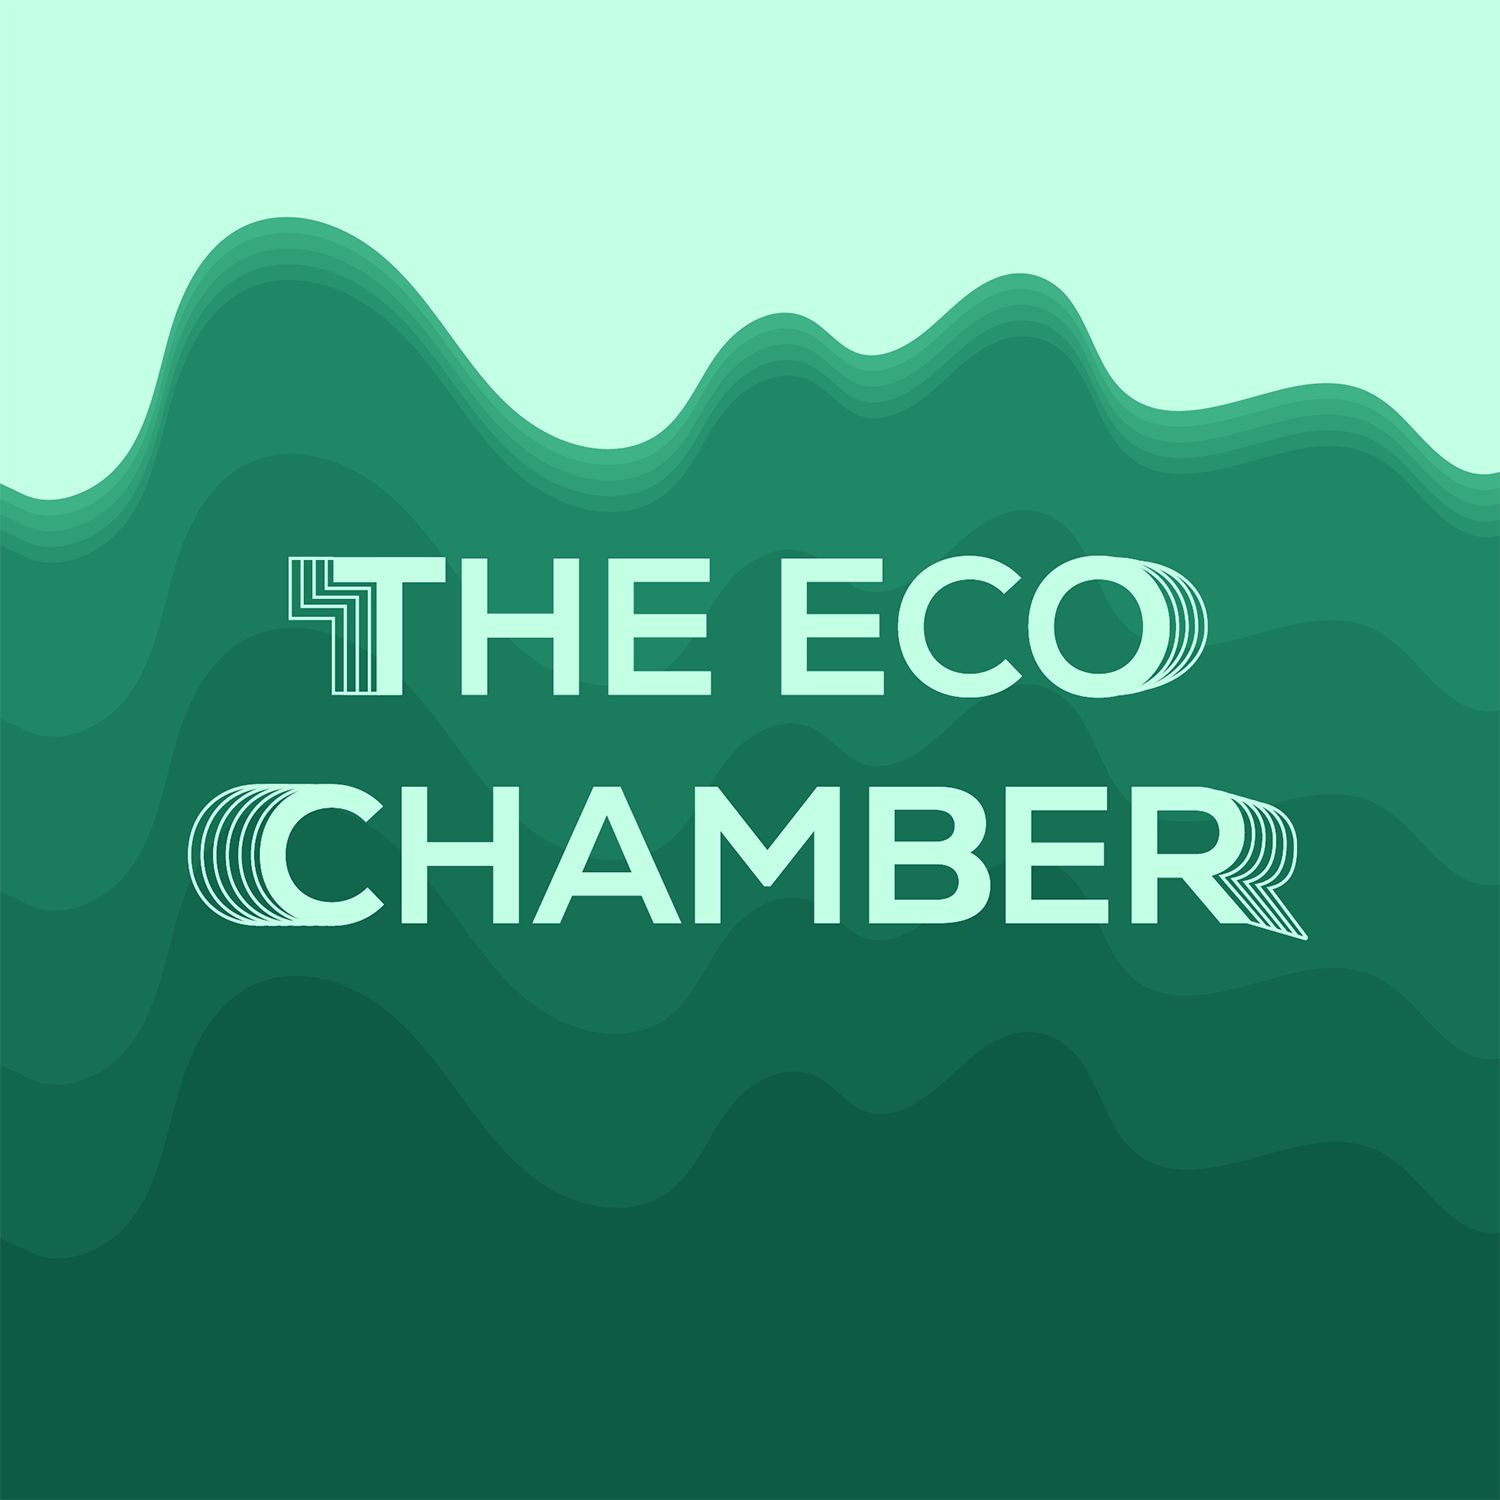 The Eco Chamber